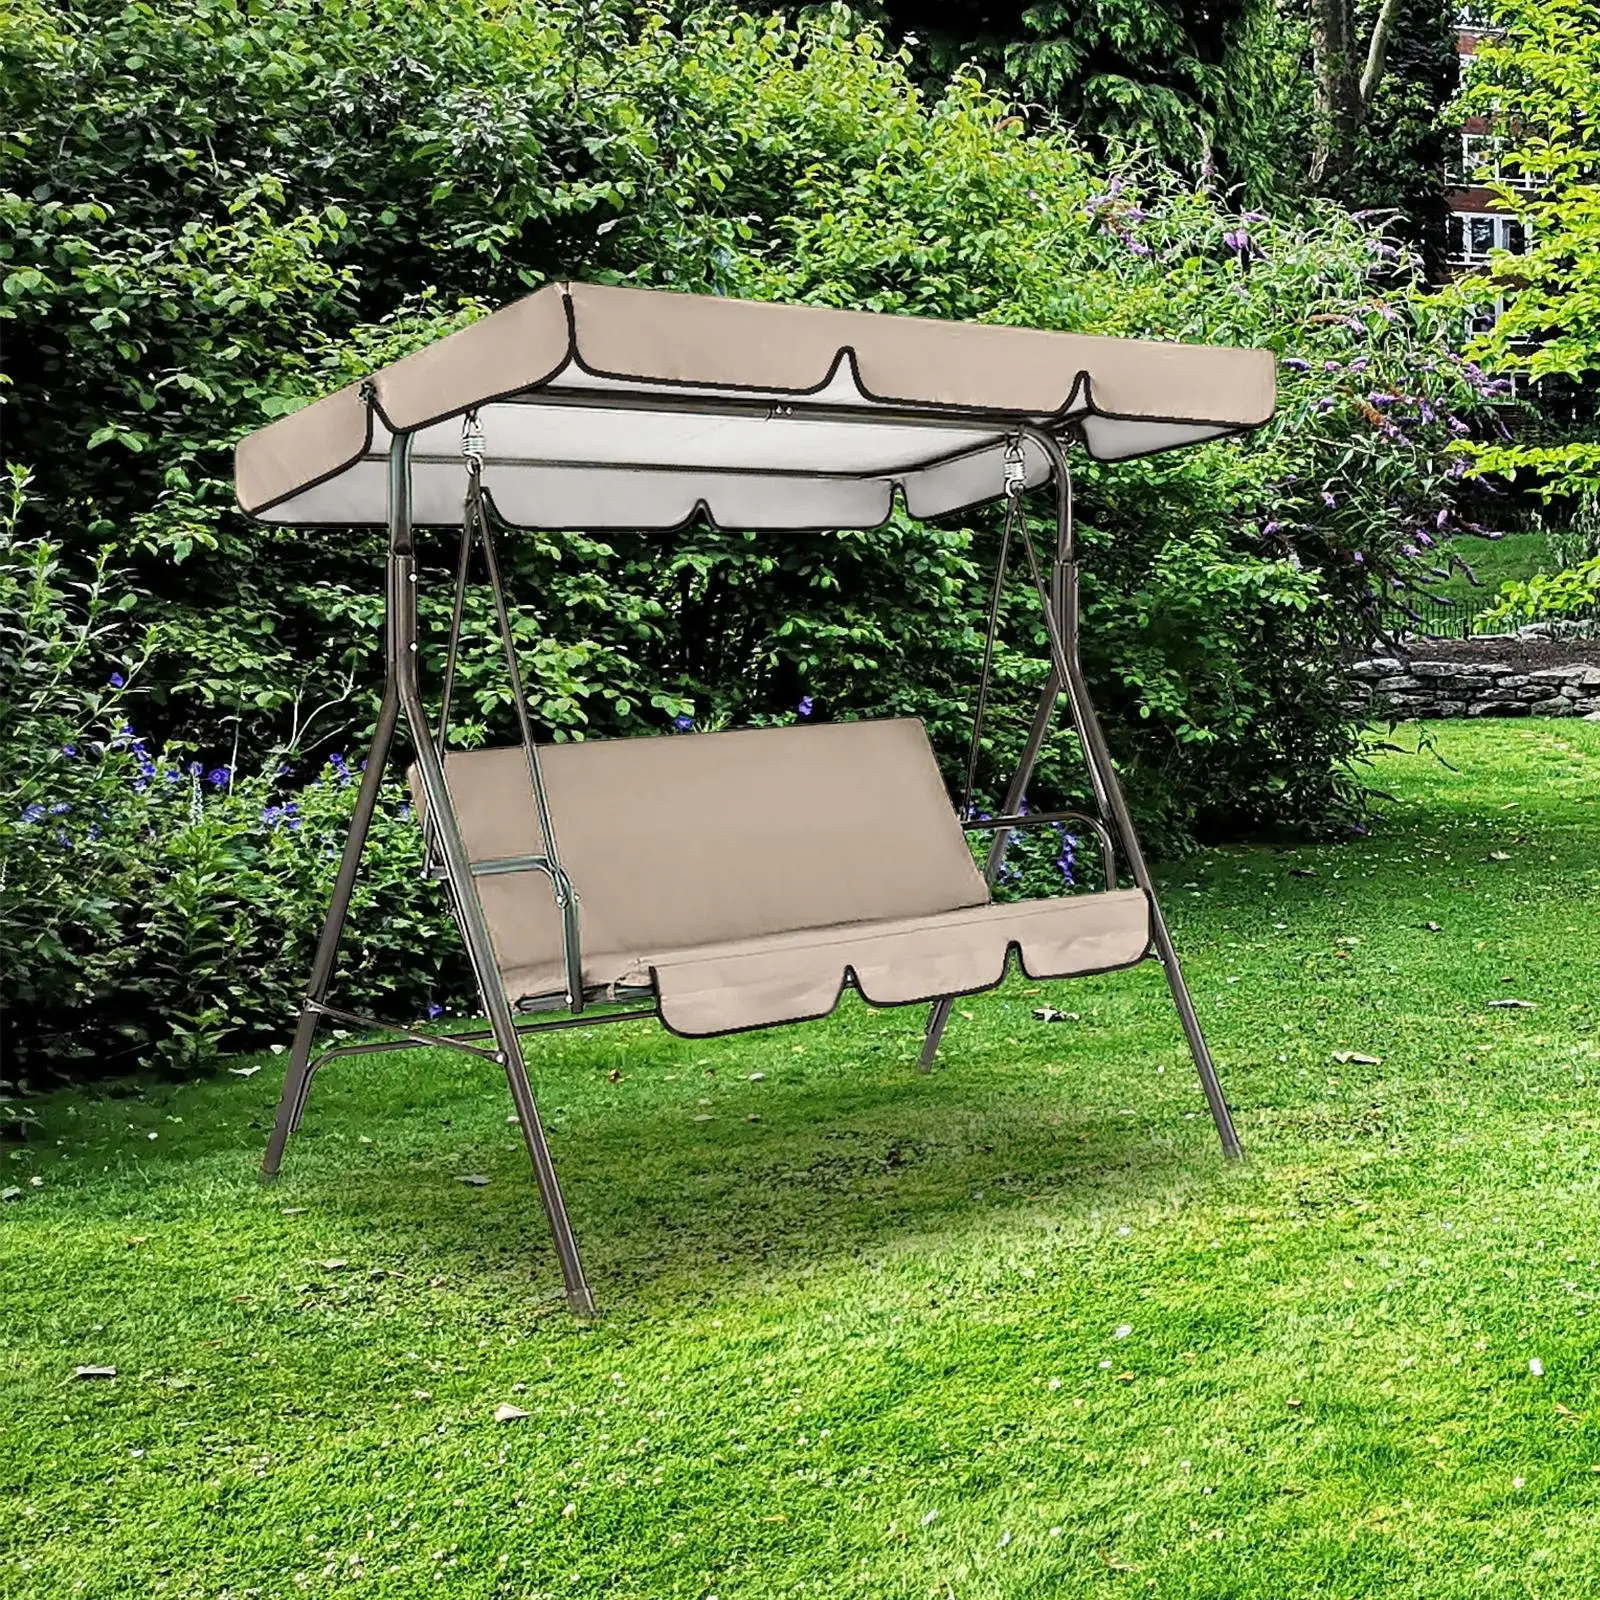 Patio Swing Canopy Windproof Durable Rainproof 3 Seater Garden Swing Seat Canopy Cover for Swing Porch Seat Yard Outdoor